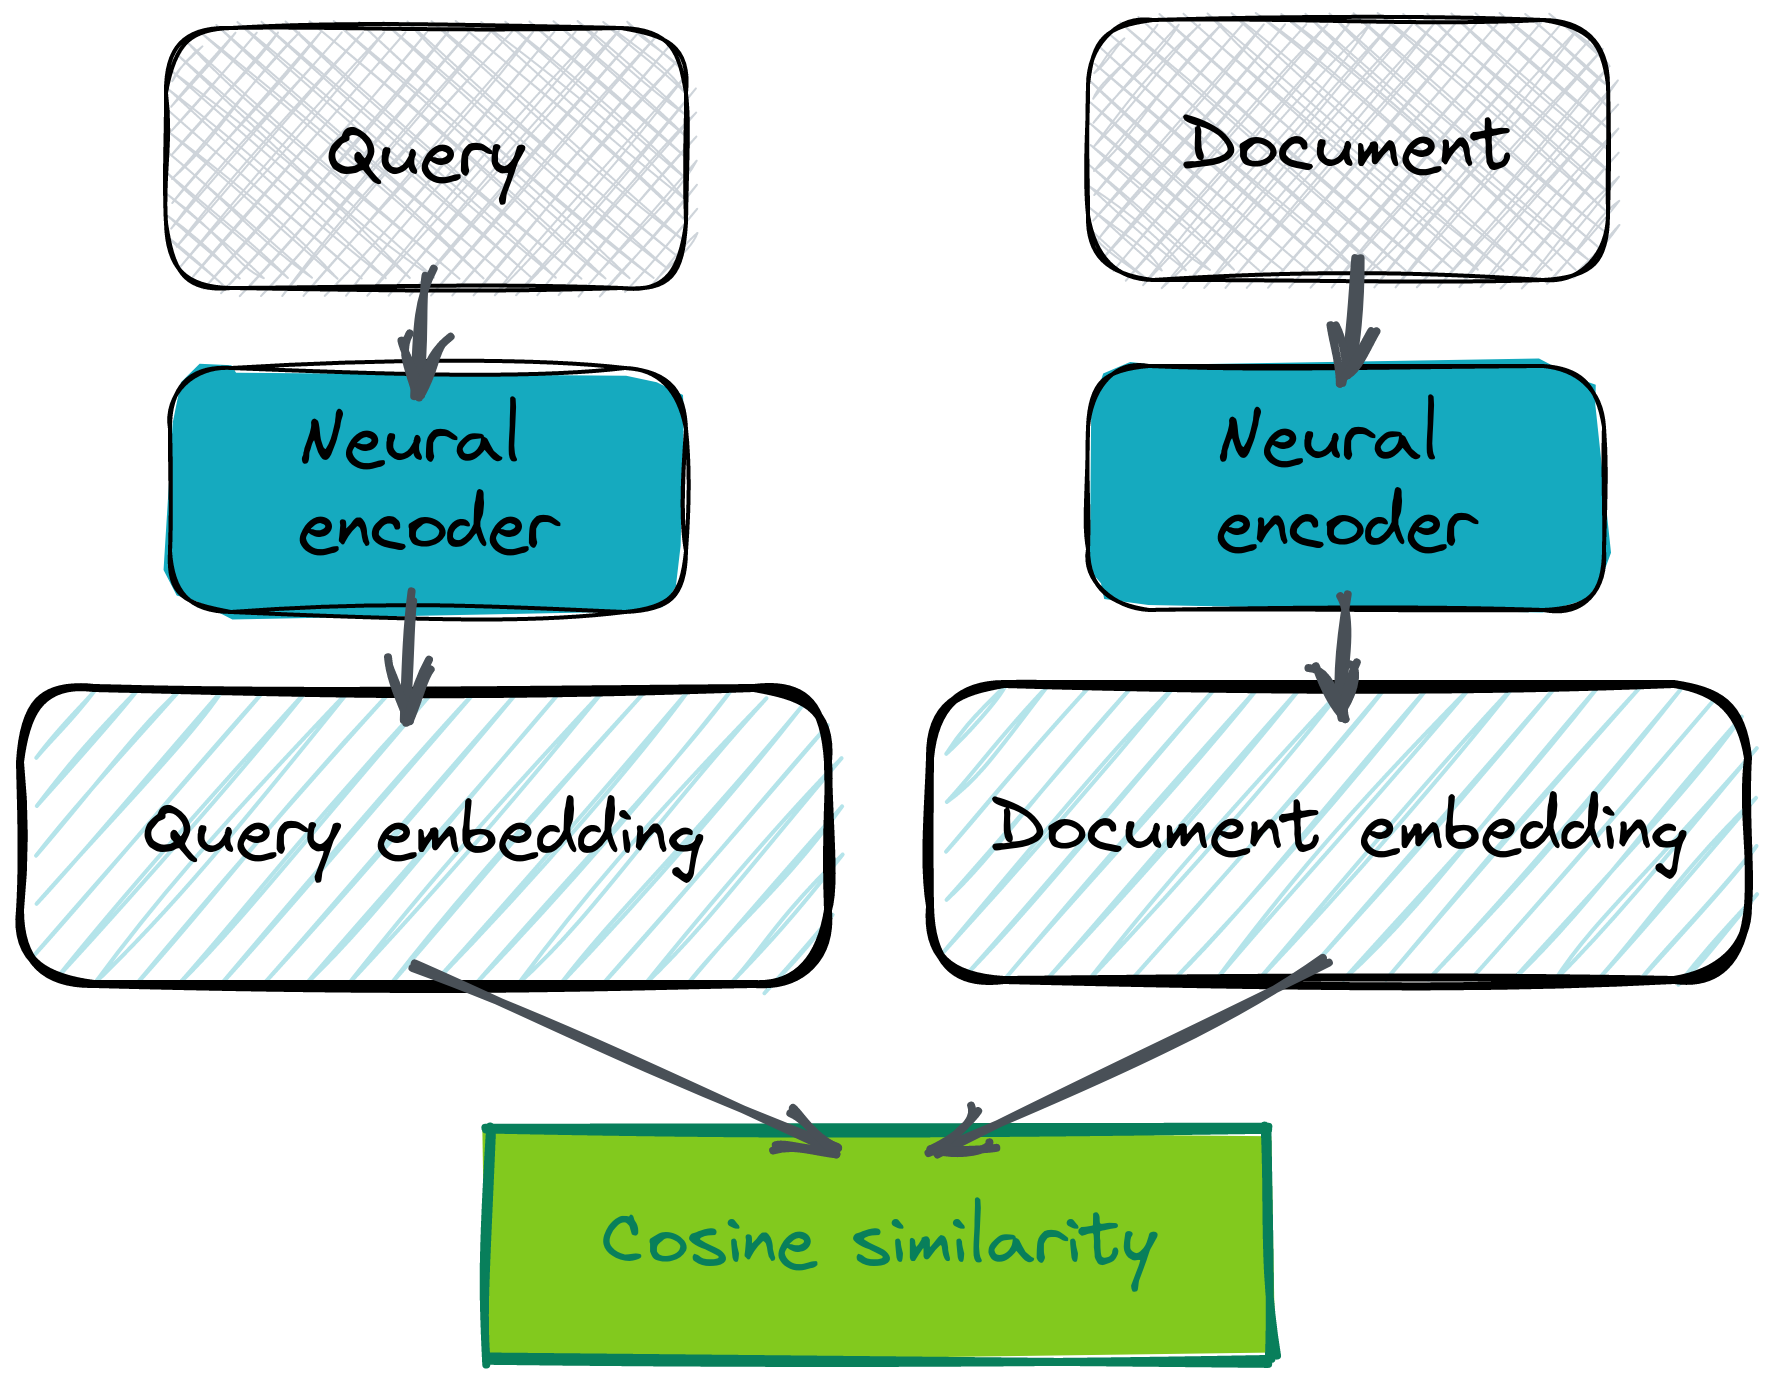 Bi-encoder structure. Both queries (questions) and documents (answers) are vectorized by the same neural encoder.Output embeddings are then compared by a chosen distance function, typically cosine similarity.